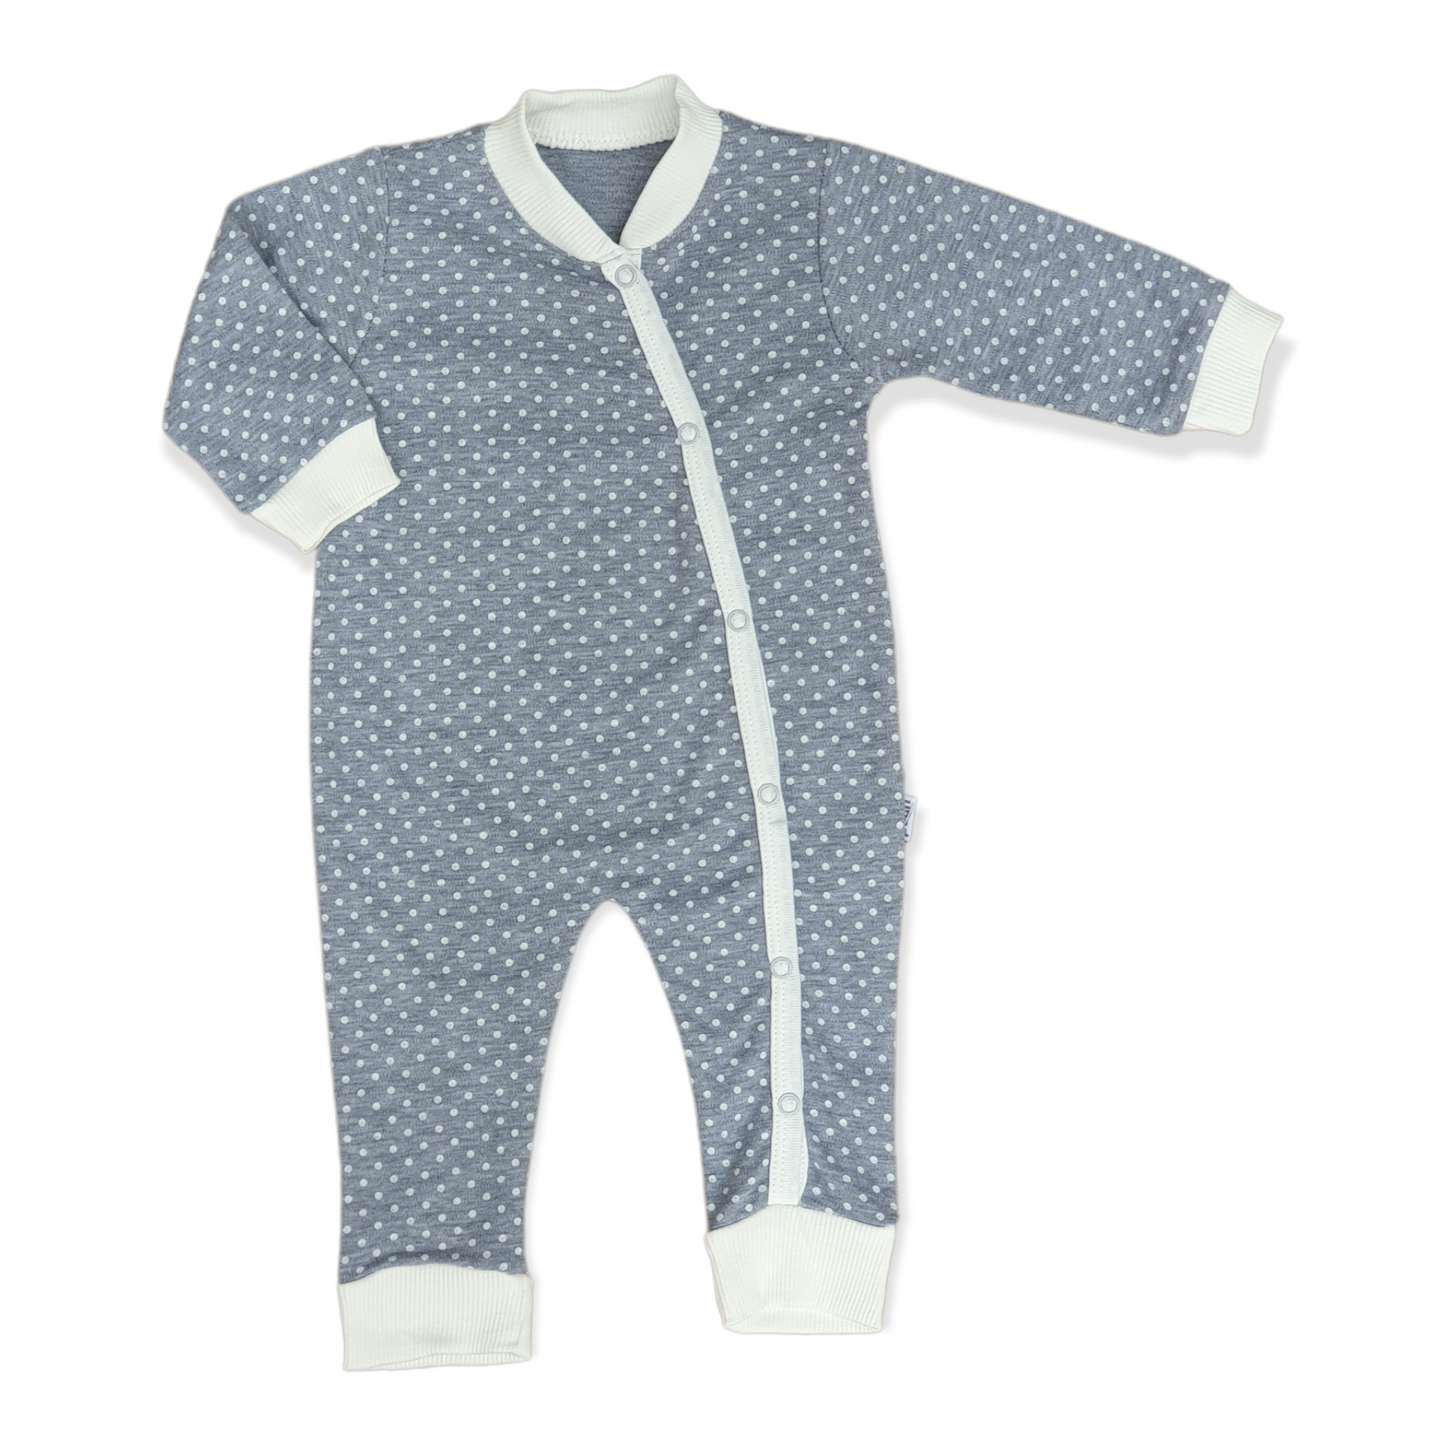 Puanbaby - Long Sleeve Dotted Baby Girl Jumpsuit